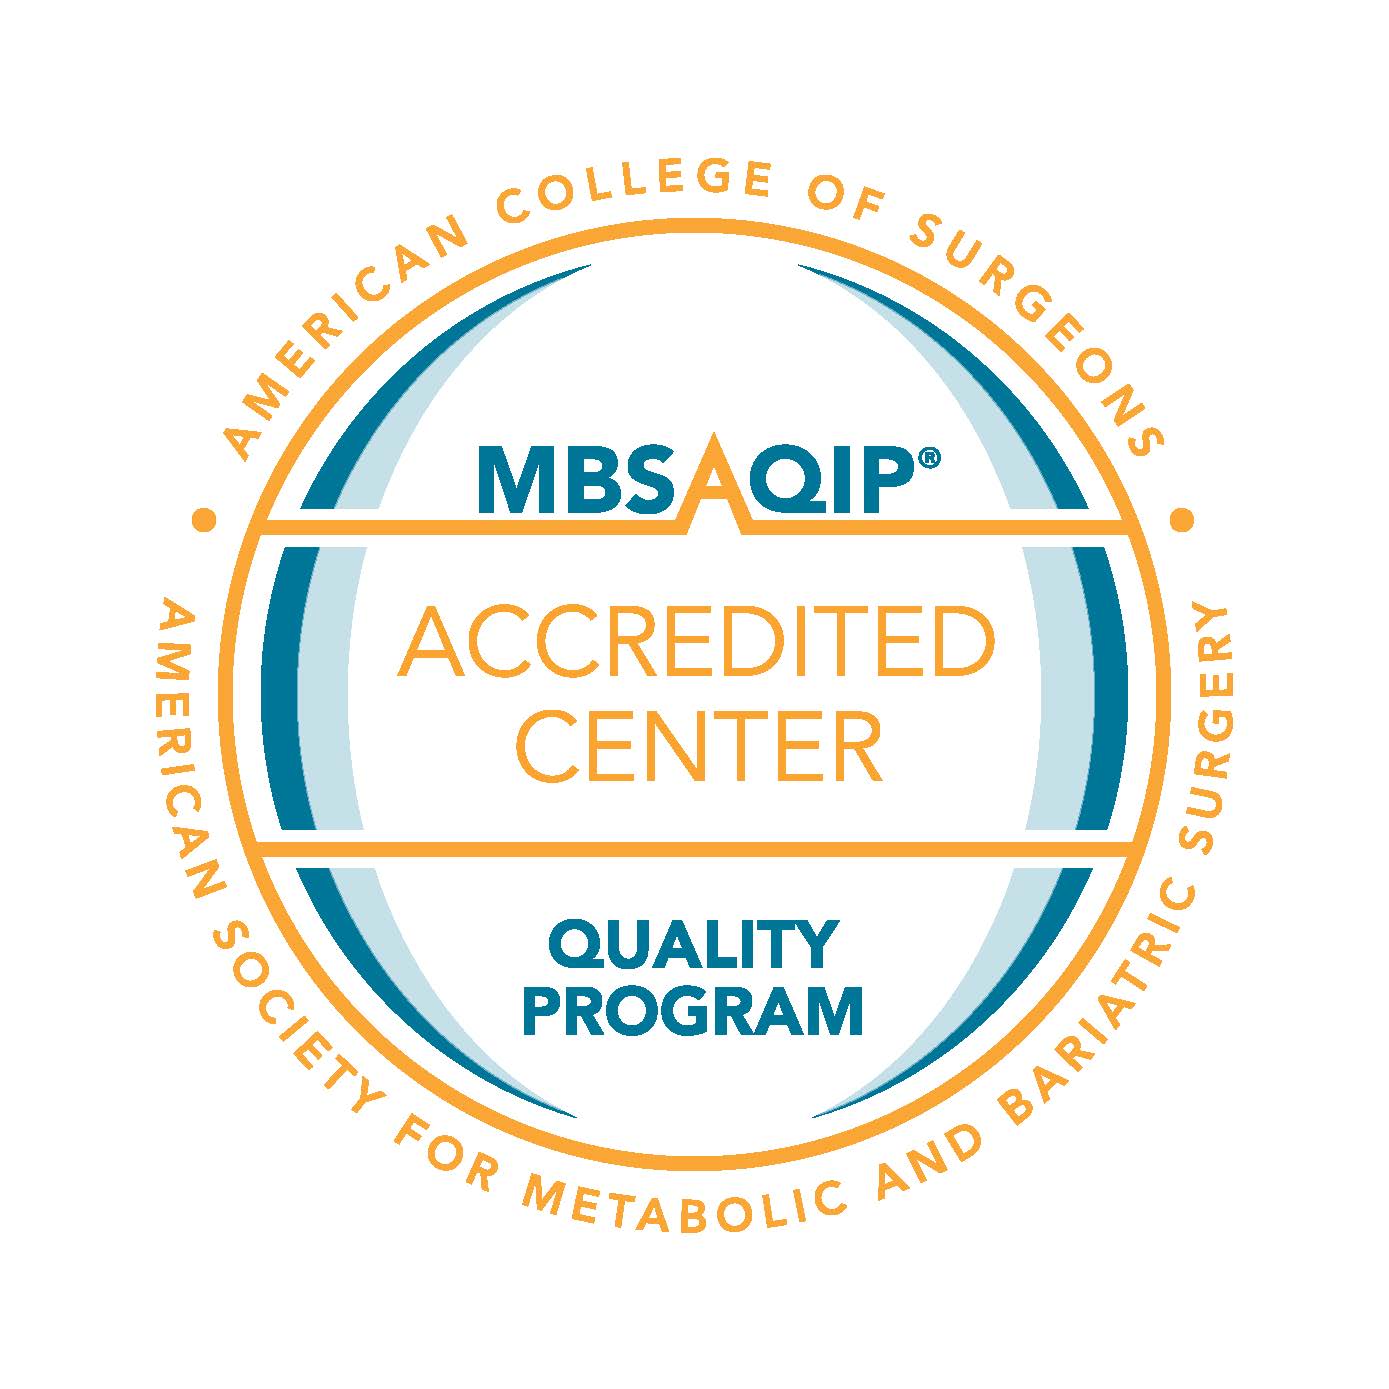 MBSAQIP Accredited – Comprehensive Center seal